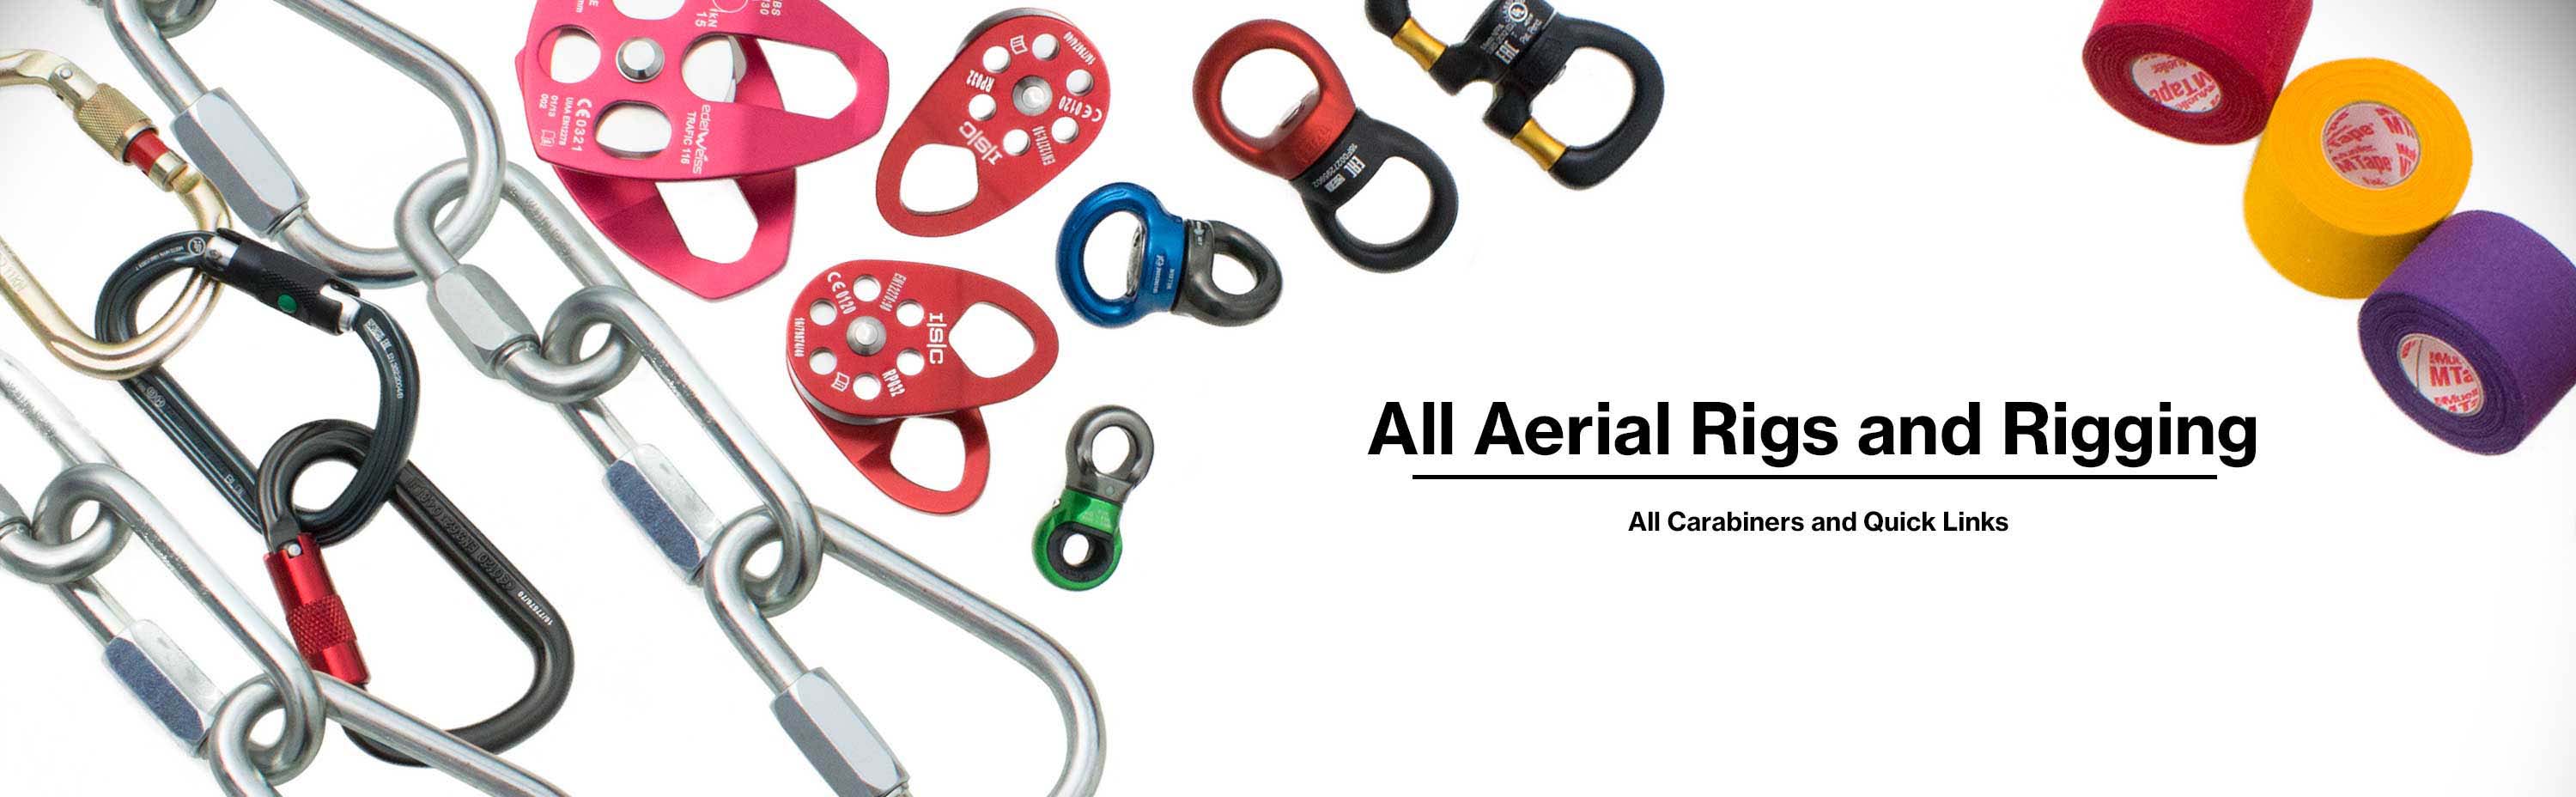 Aerial Rigs and Rigging